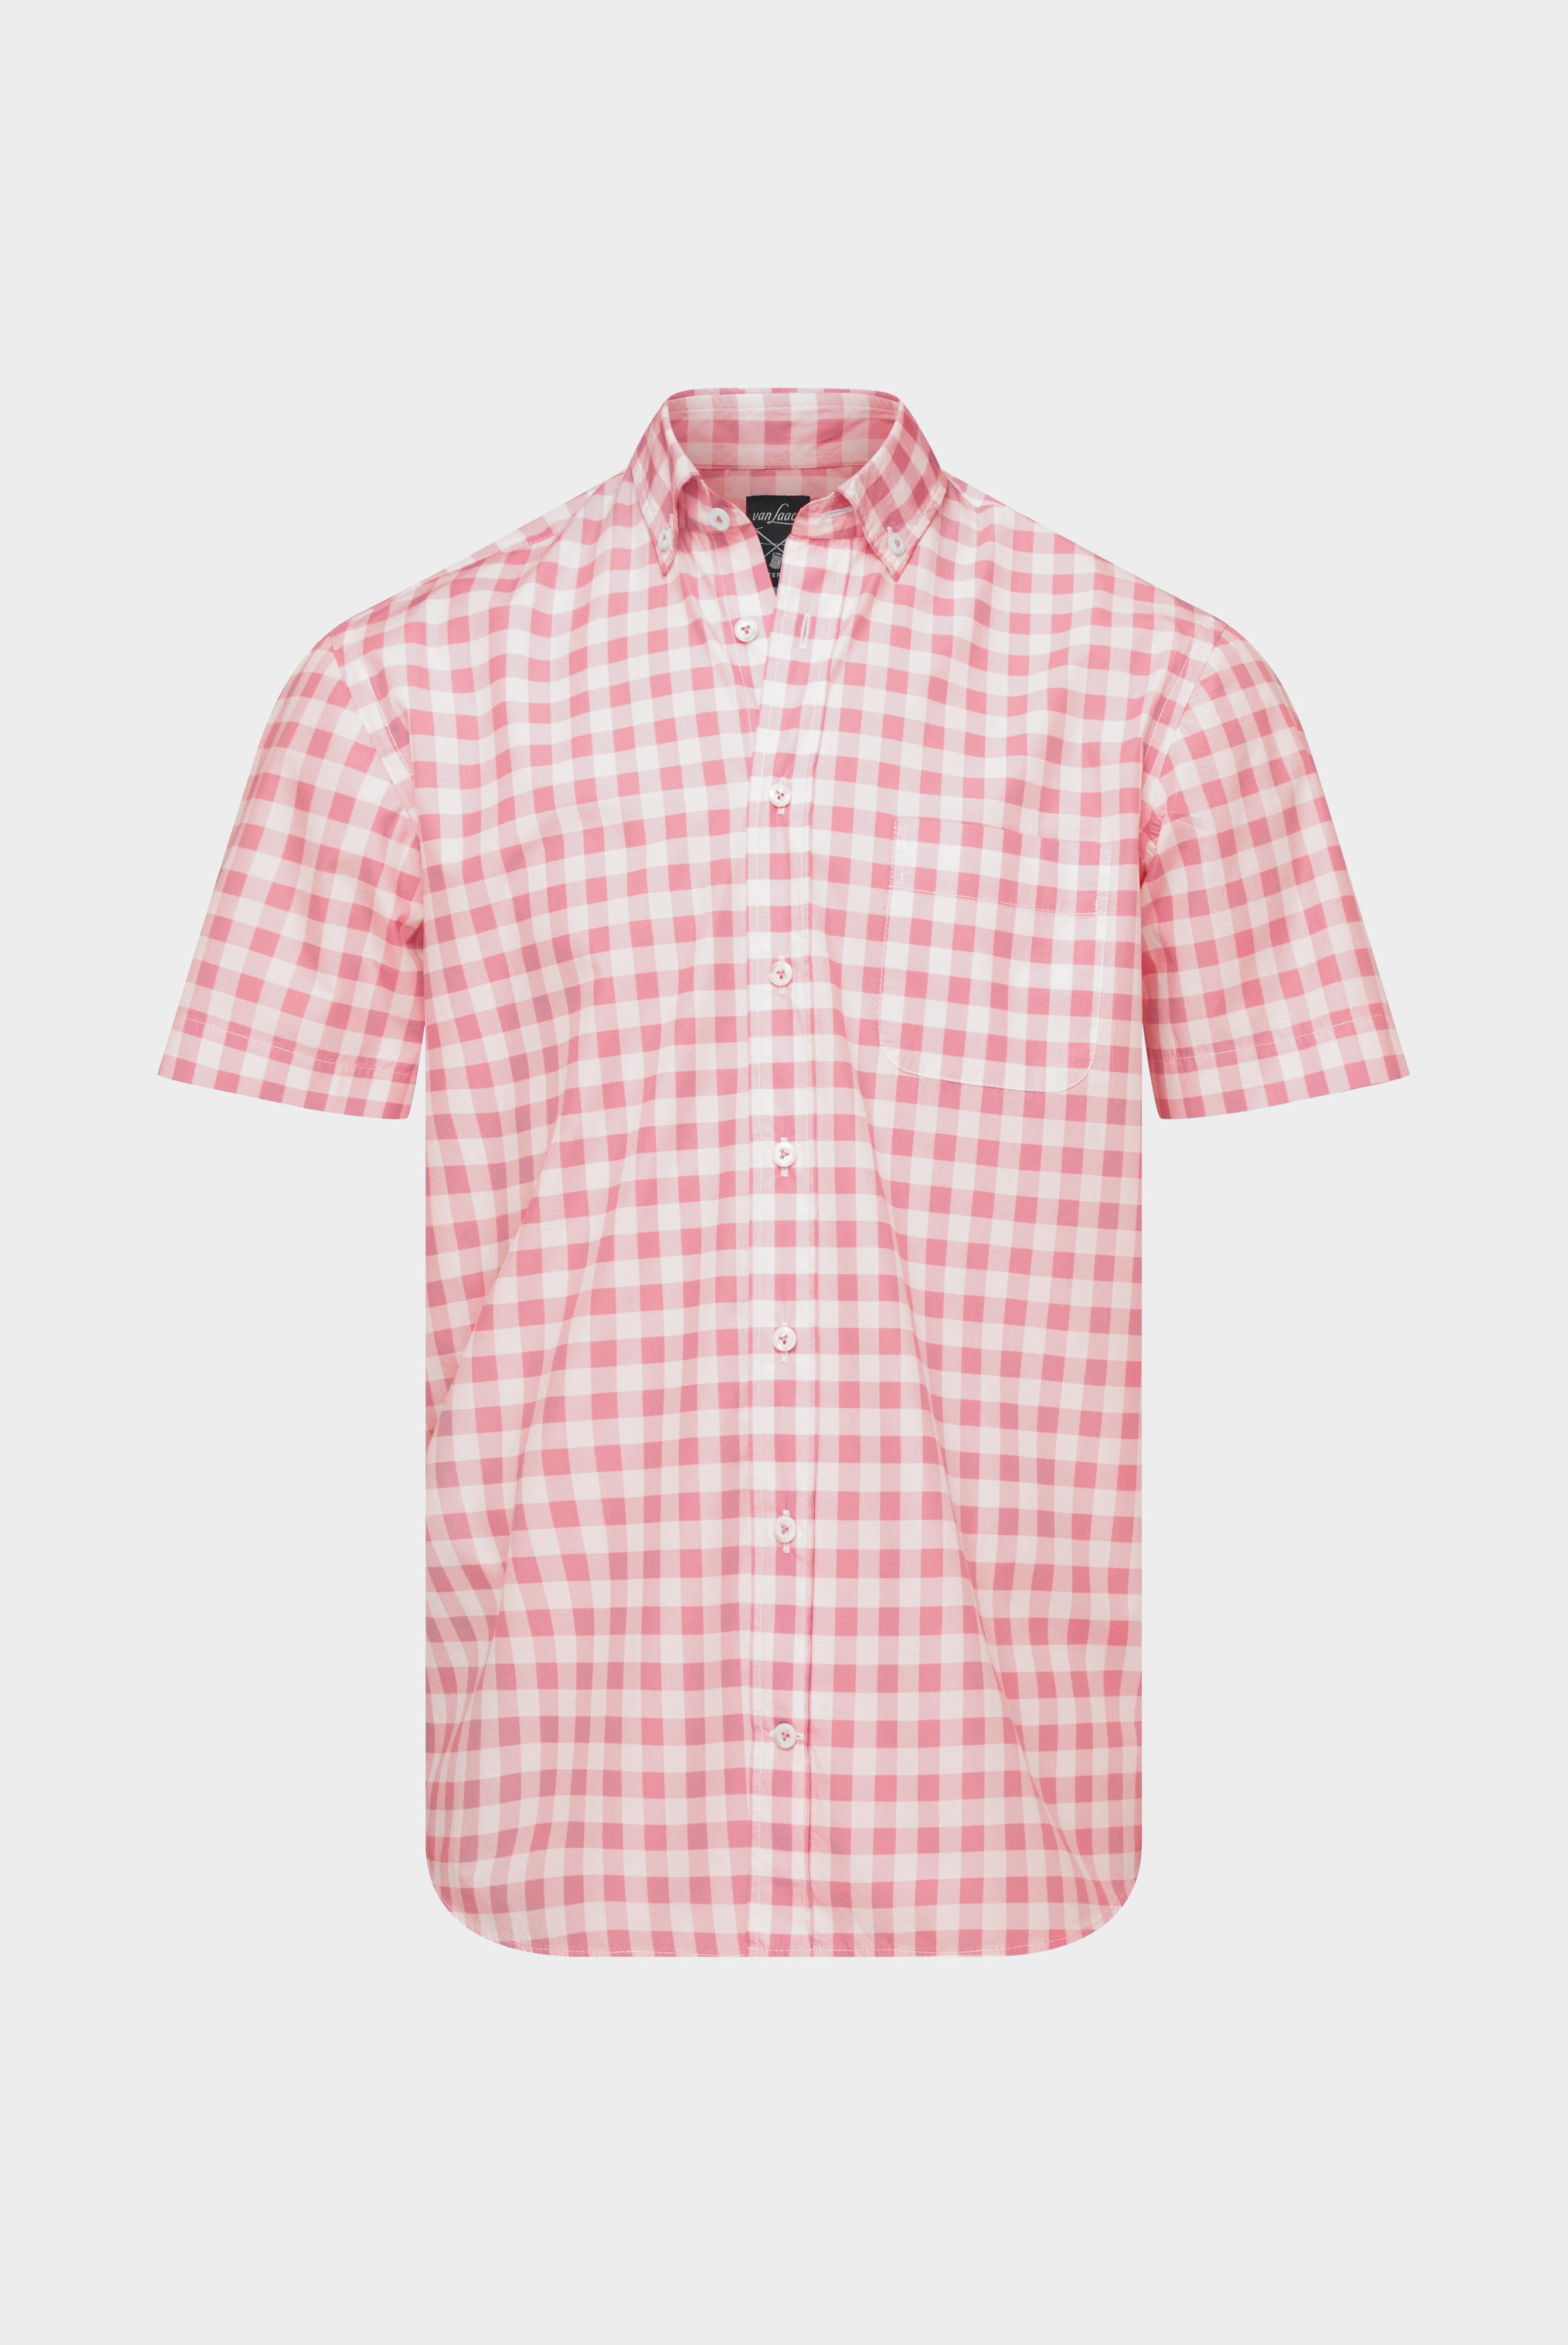 Casual Shirts+Checked poplin short-sleeved shirt with button-down collar+20.2053.Q2.170391.530.39